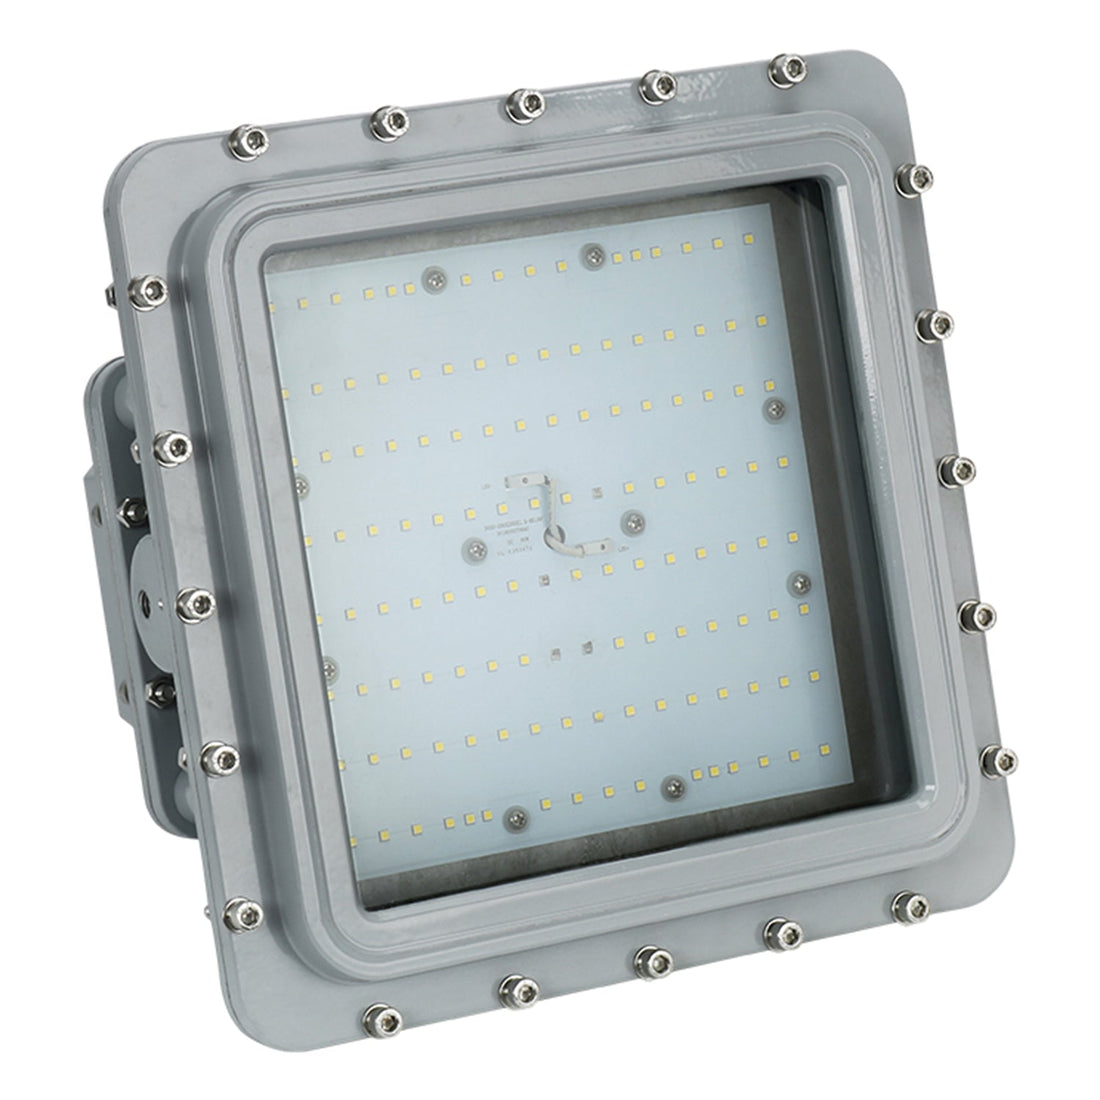 LED Explosion Proof Flood Light 60W - 5000K, 8100Lumens Dimmable : Versatile and Durable Lighting Solution for Hazardous Locations with  and IP66 Protection, Ideal for Industrial Environments